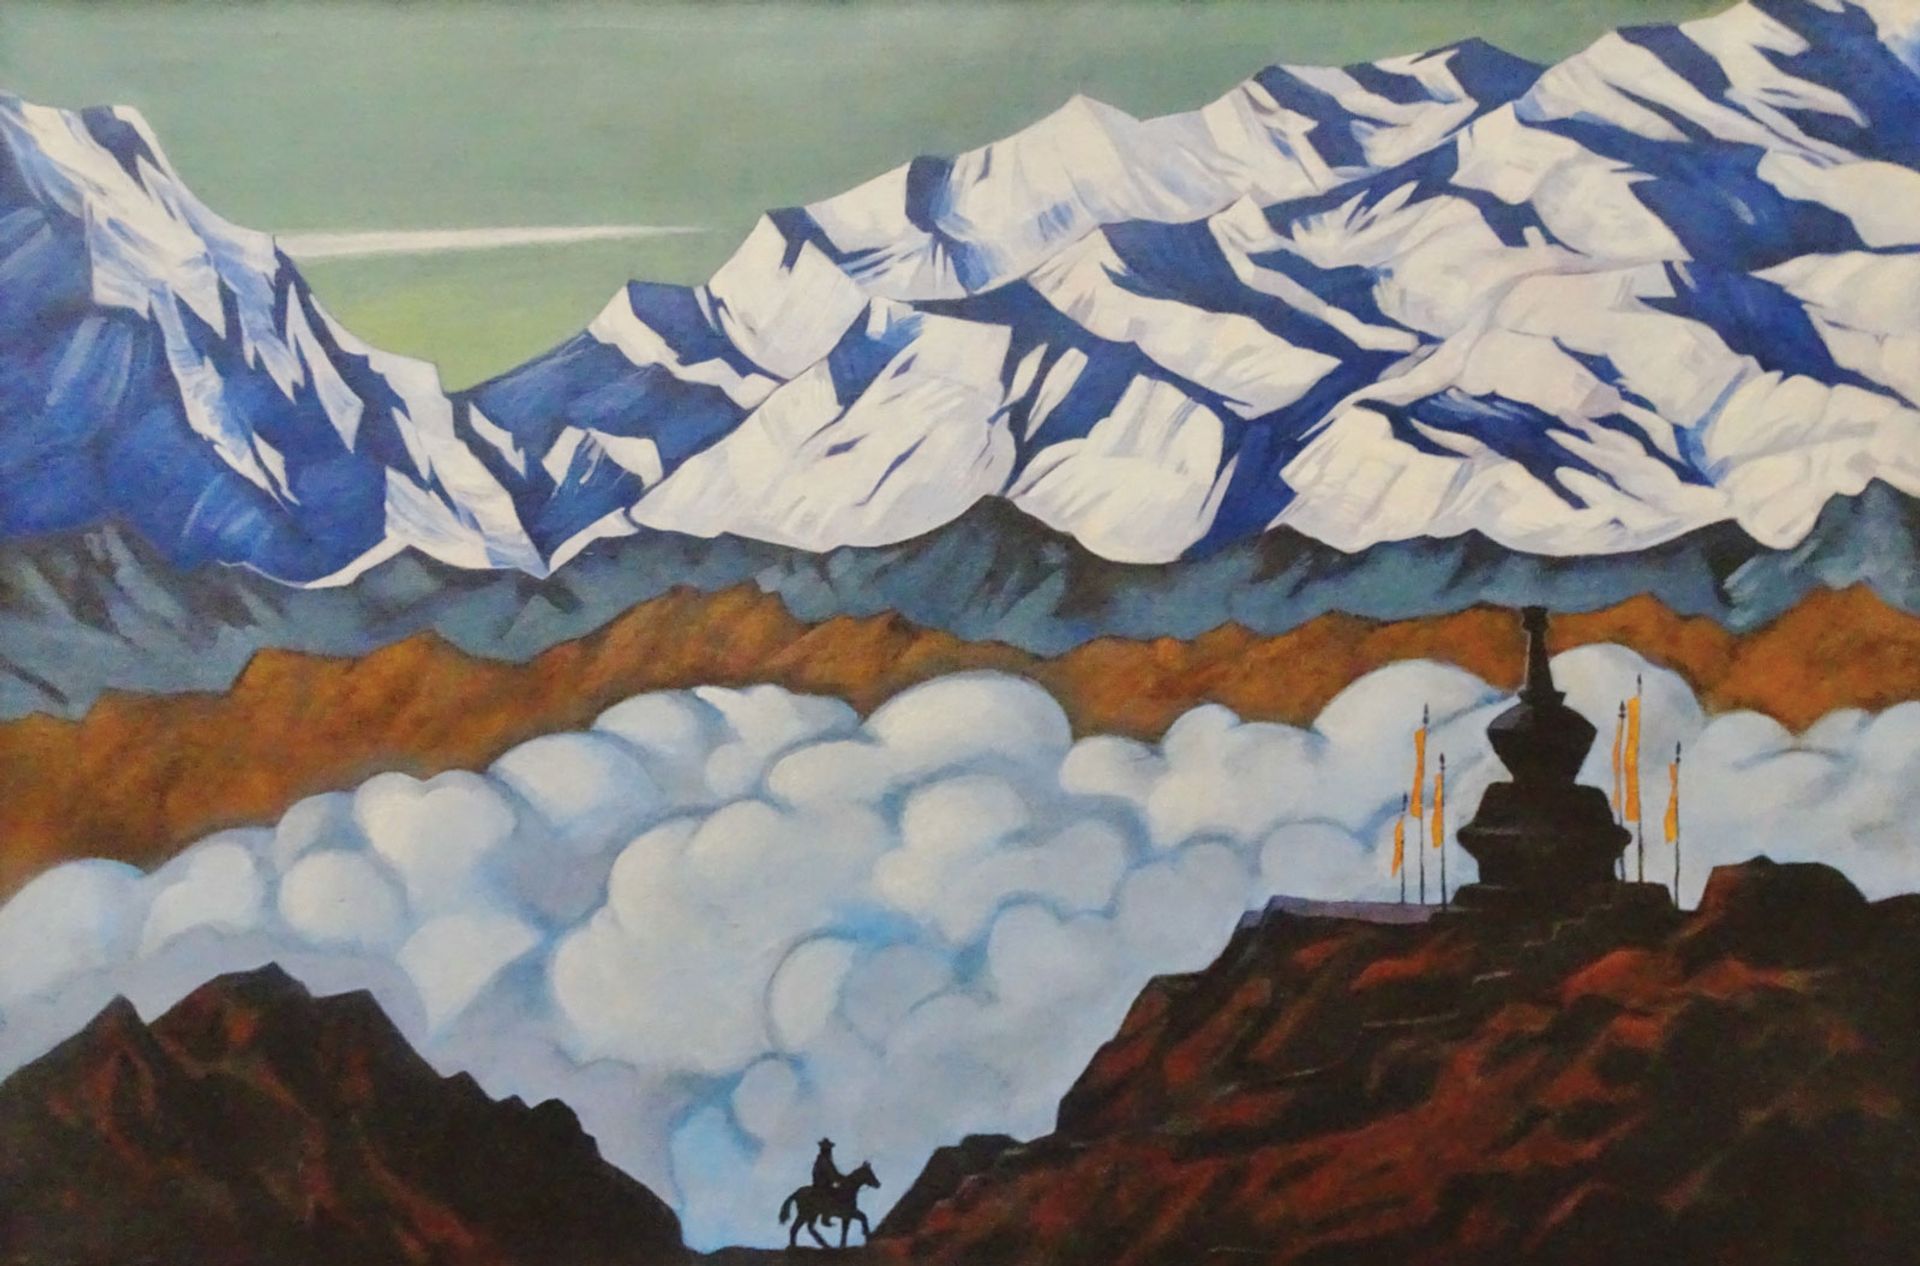 A Mountainscape ascribed to Nicholas Roerich in the Ghent show Dieleghem Foundation